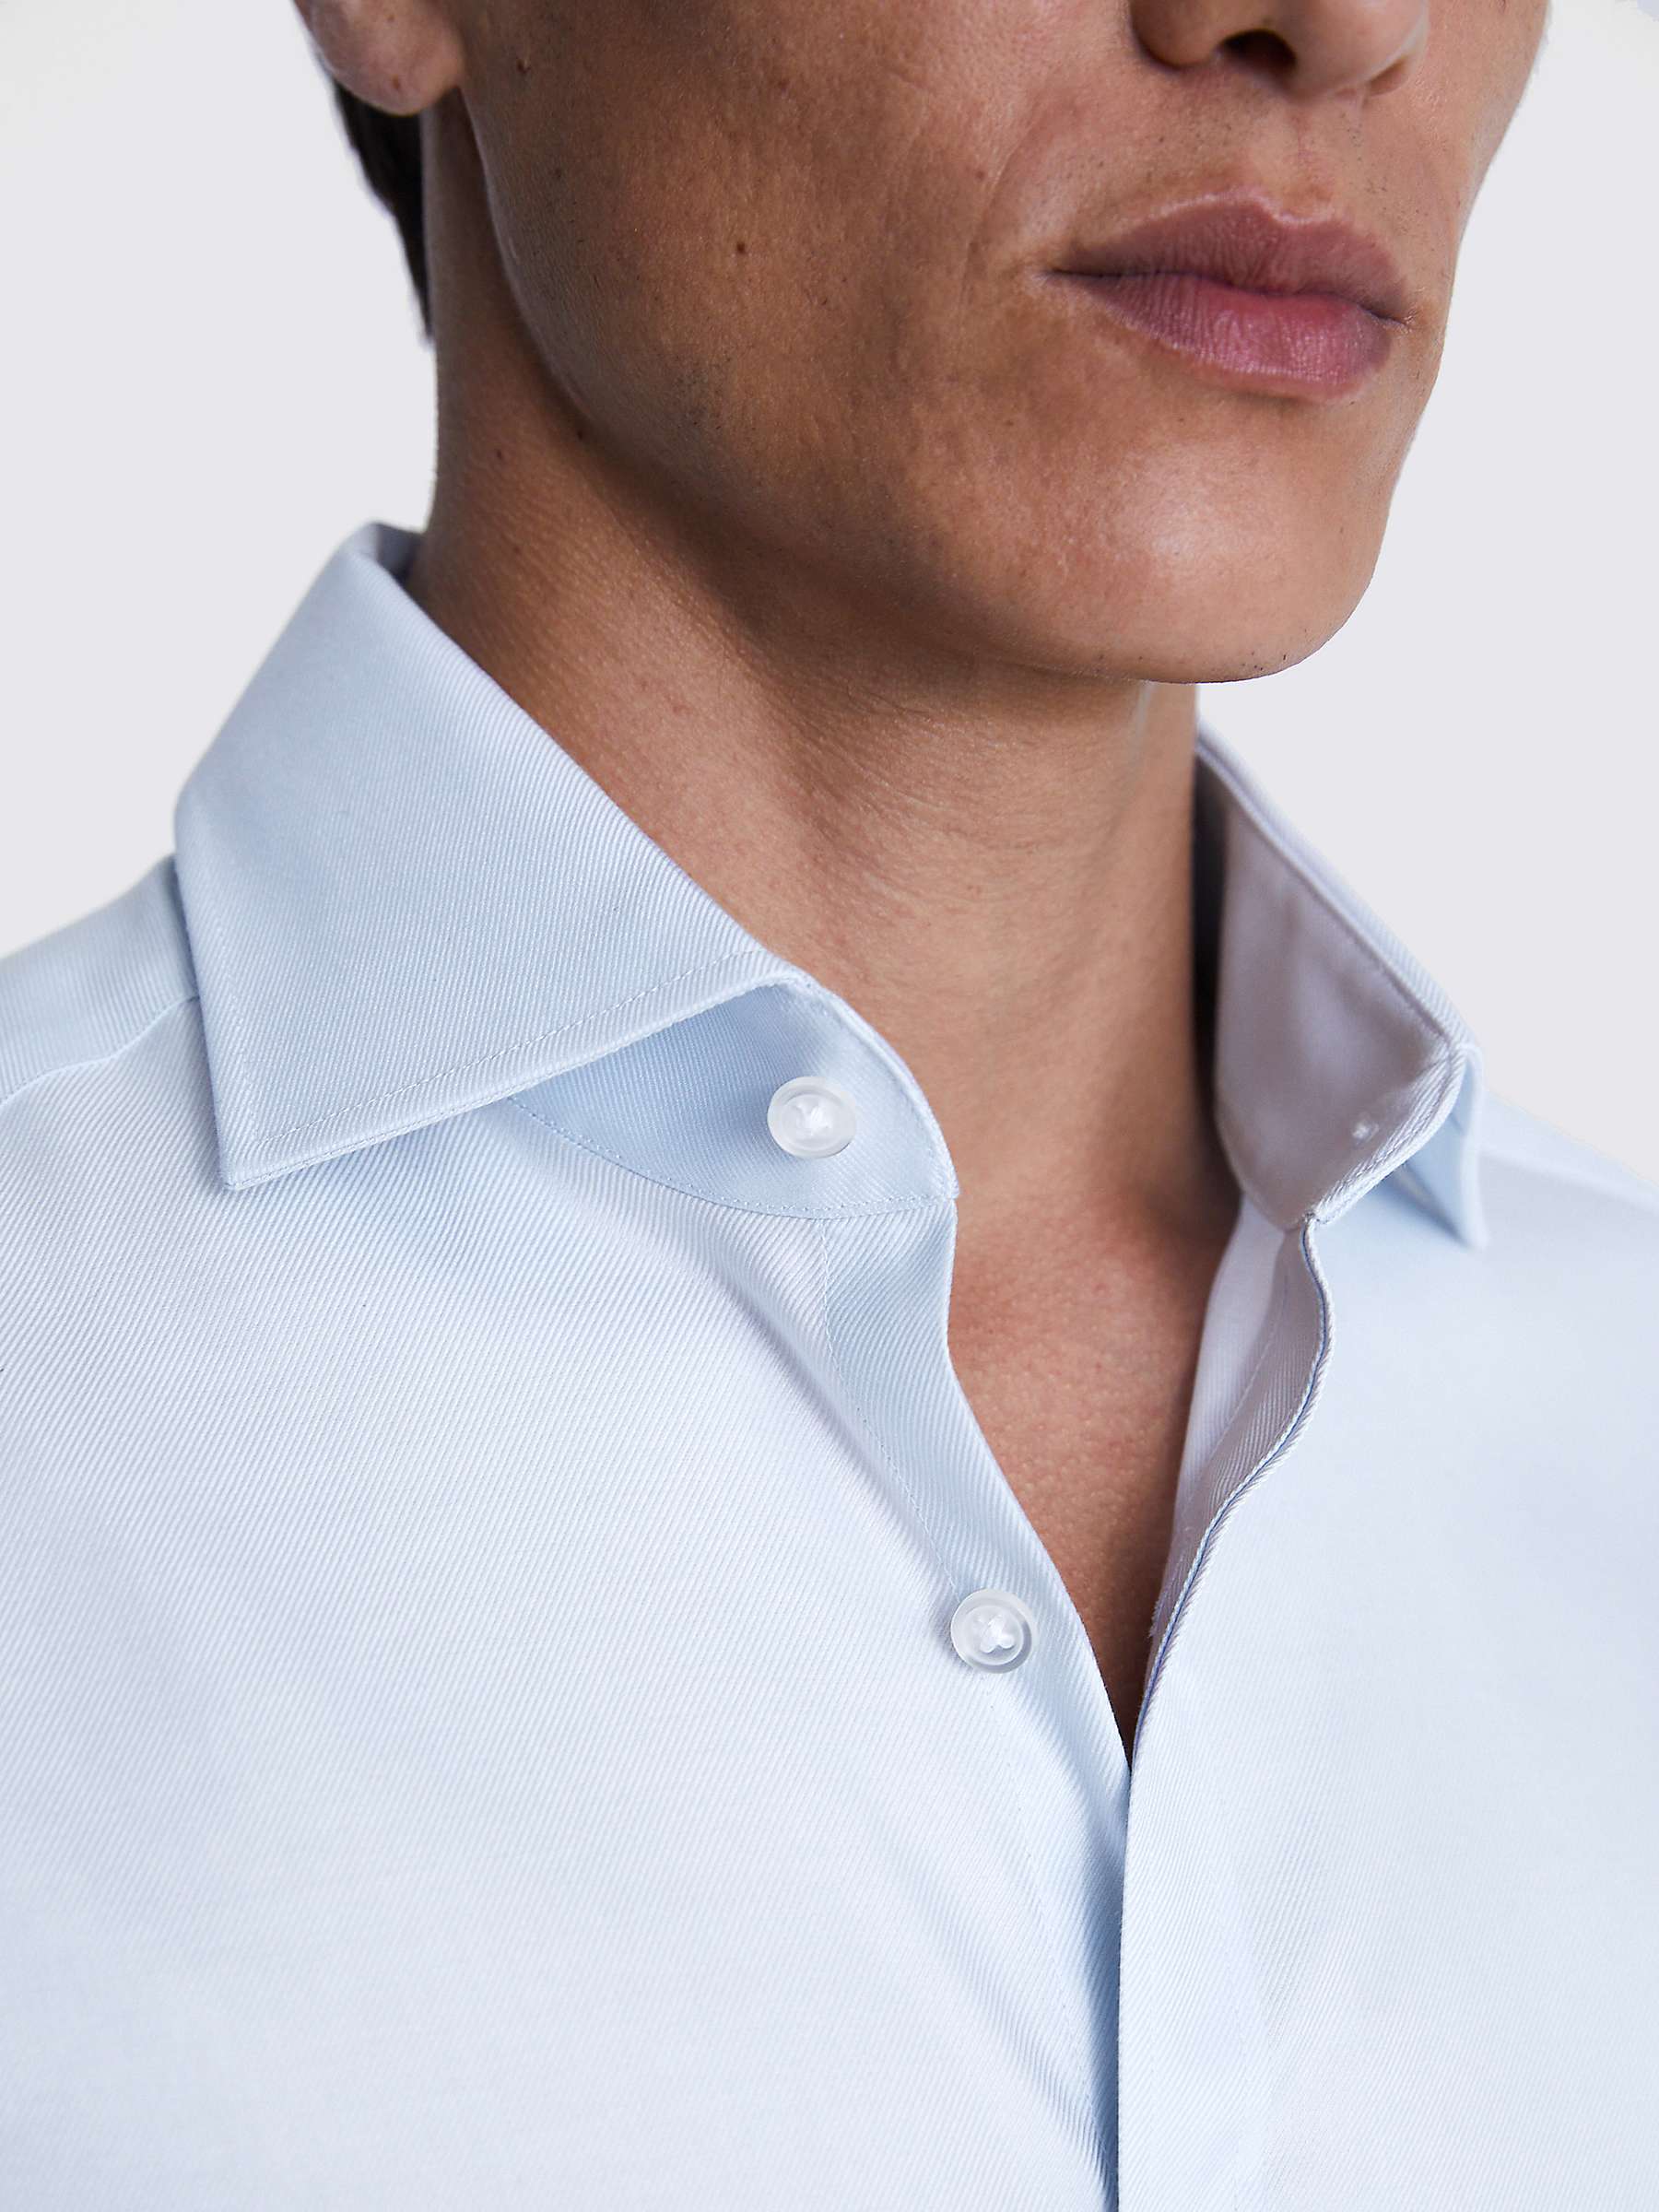 Buy Moss Slim Fit Double Cuff Twill Shirt Online at johnlewis.com